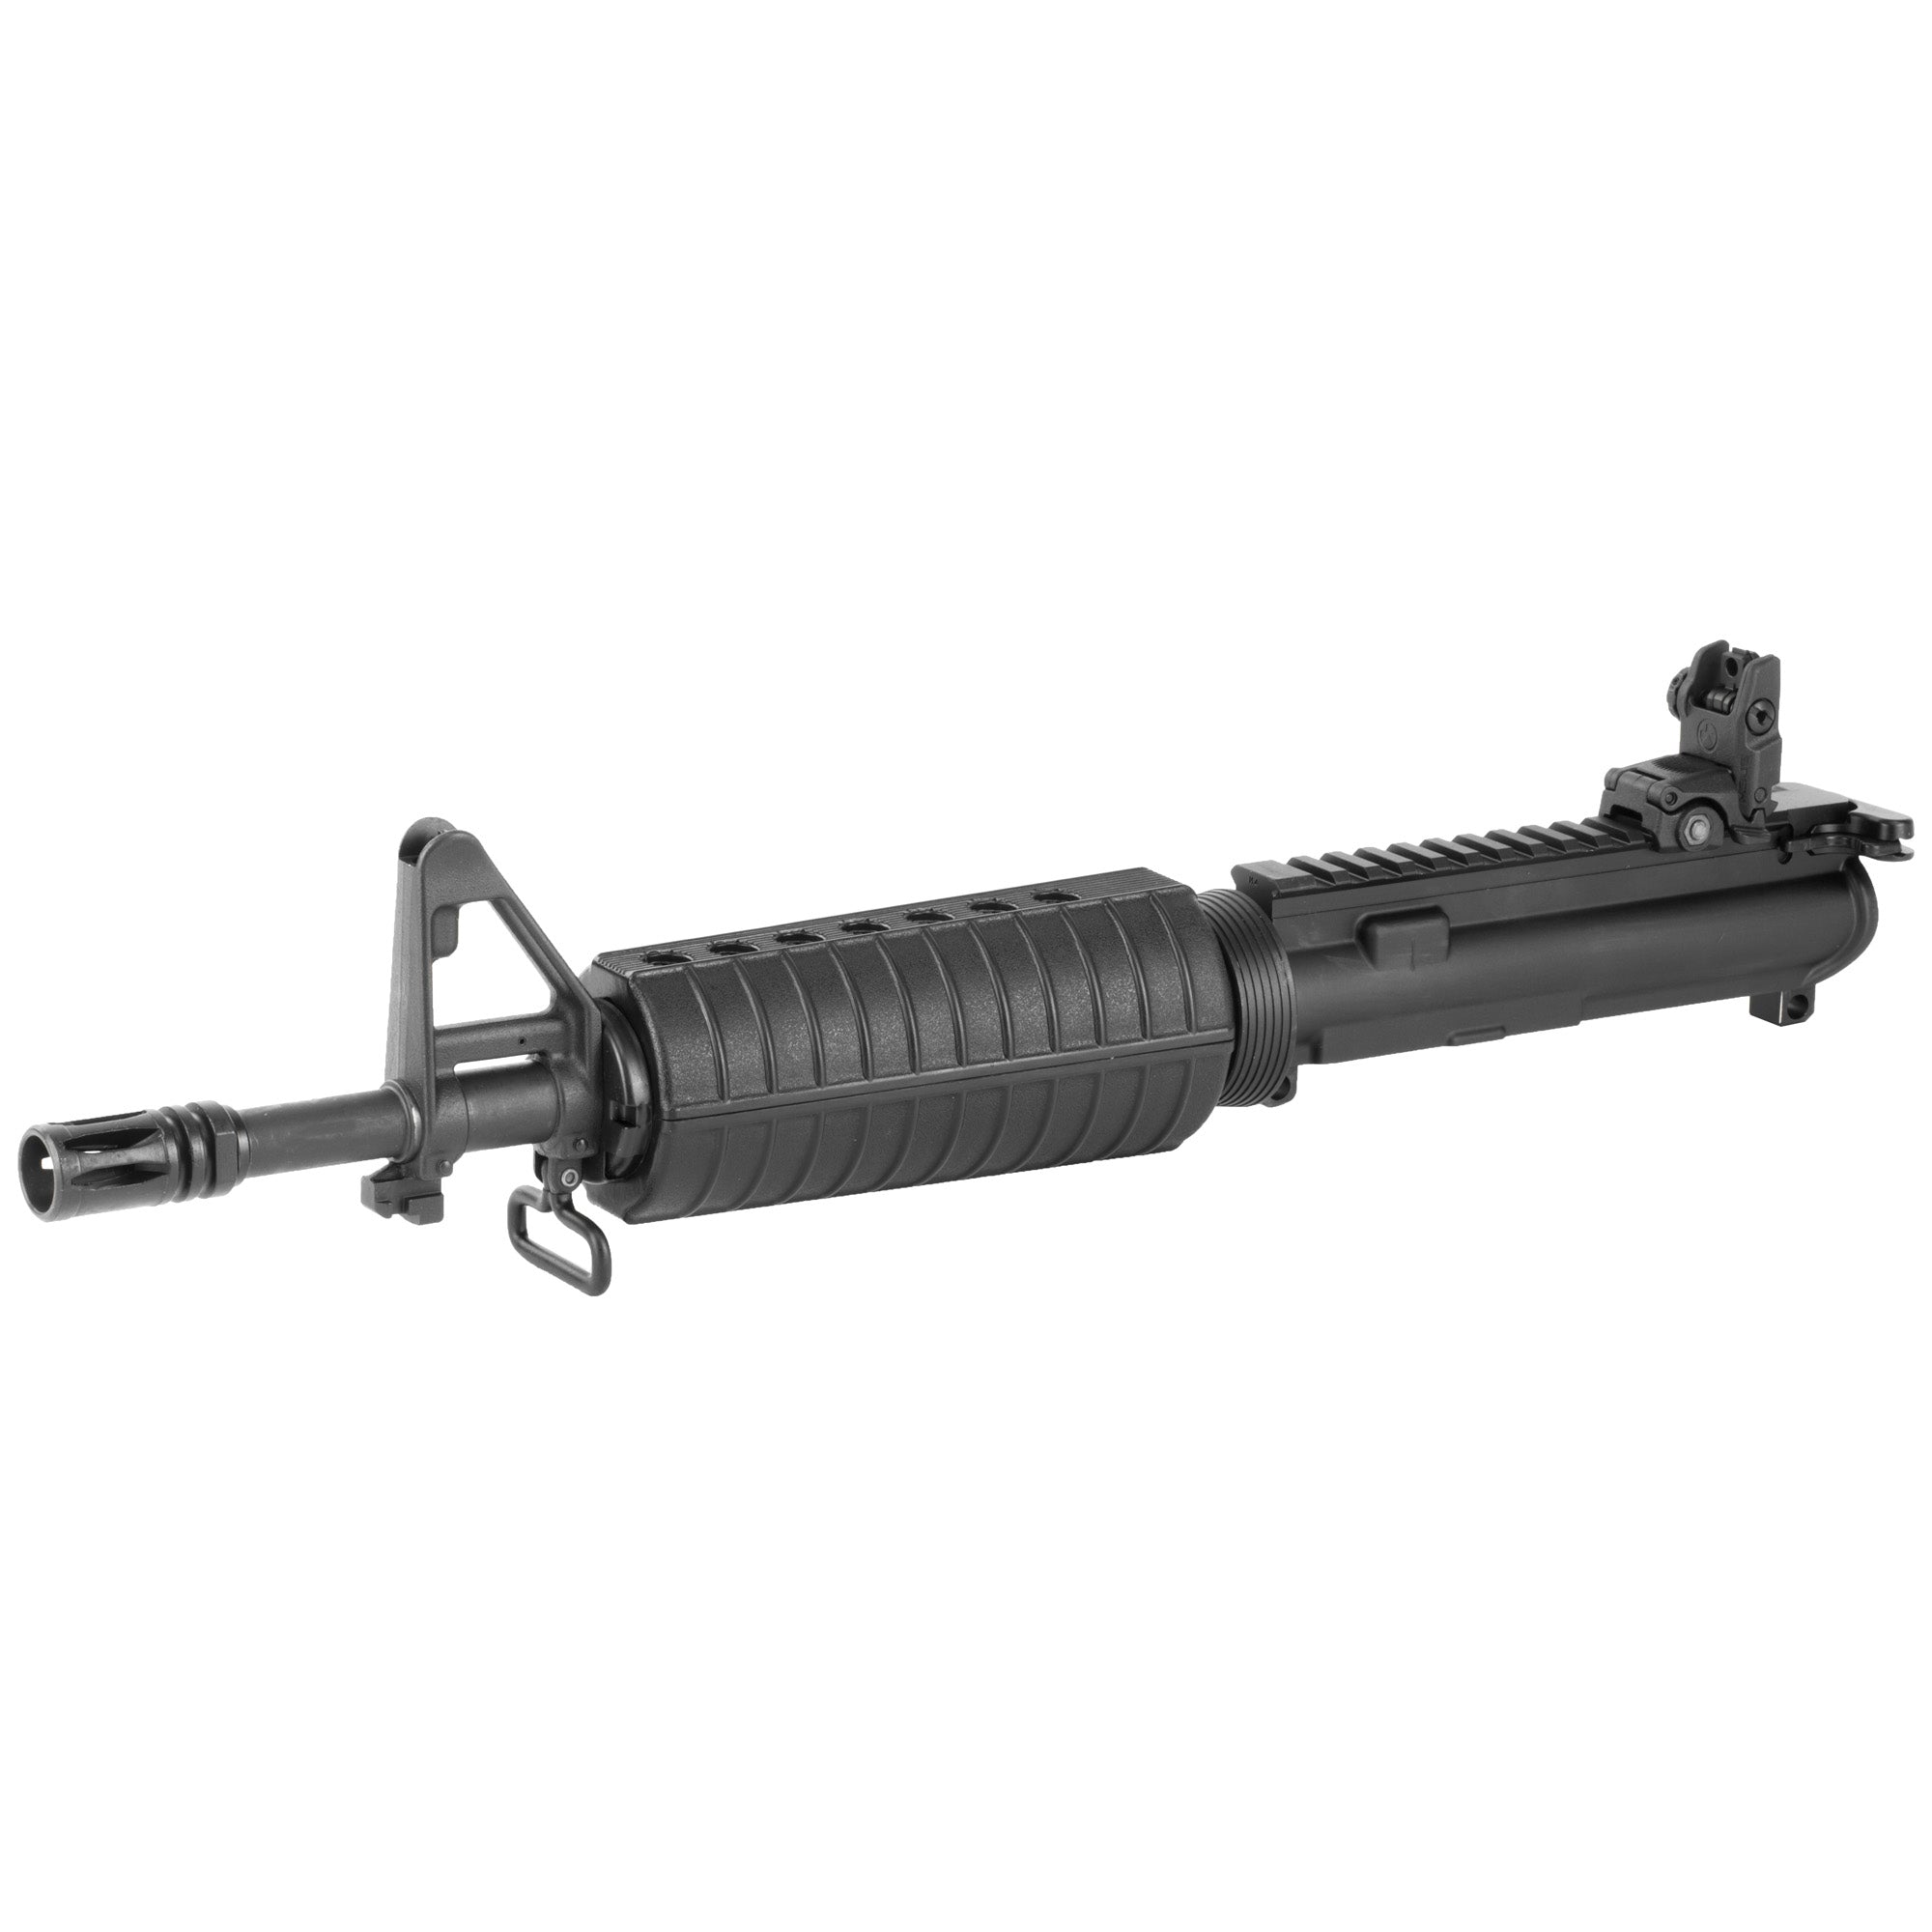 Colt's Manufacturing Complete Upper with 11.5-inch lightweight barrel, A2 front sight, and Magpul BUIS rear sight, finished in black, for 223 Rem/556NATO rifles